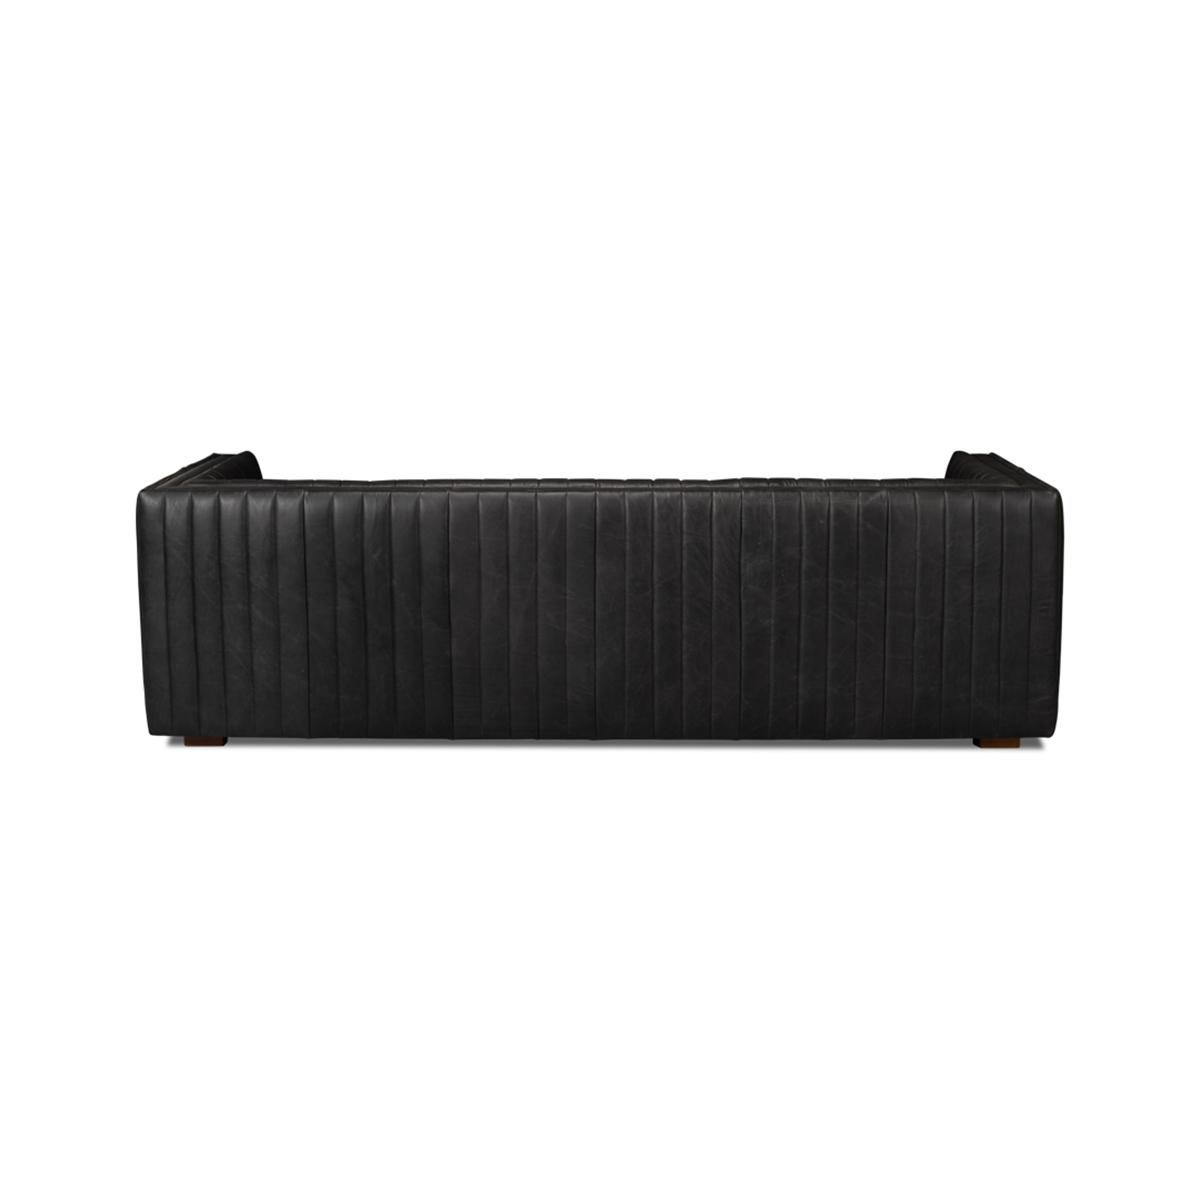 Contemporary Black Leather Mid Century Sofa For Sale